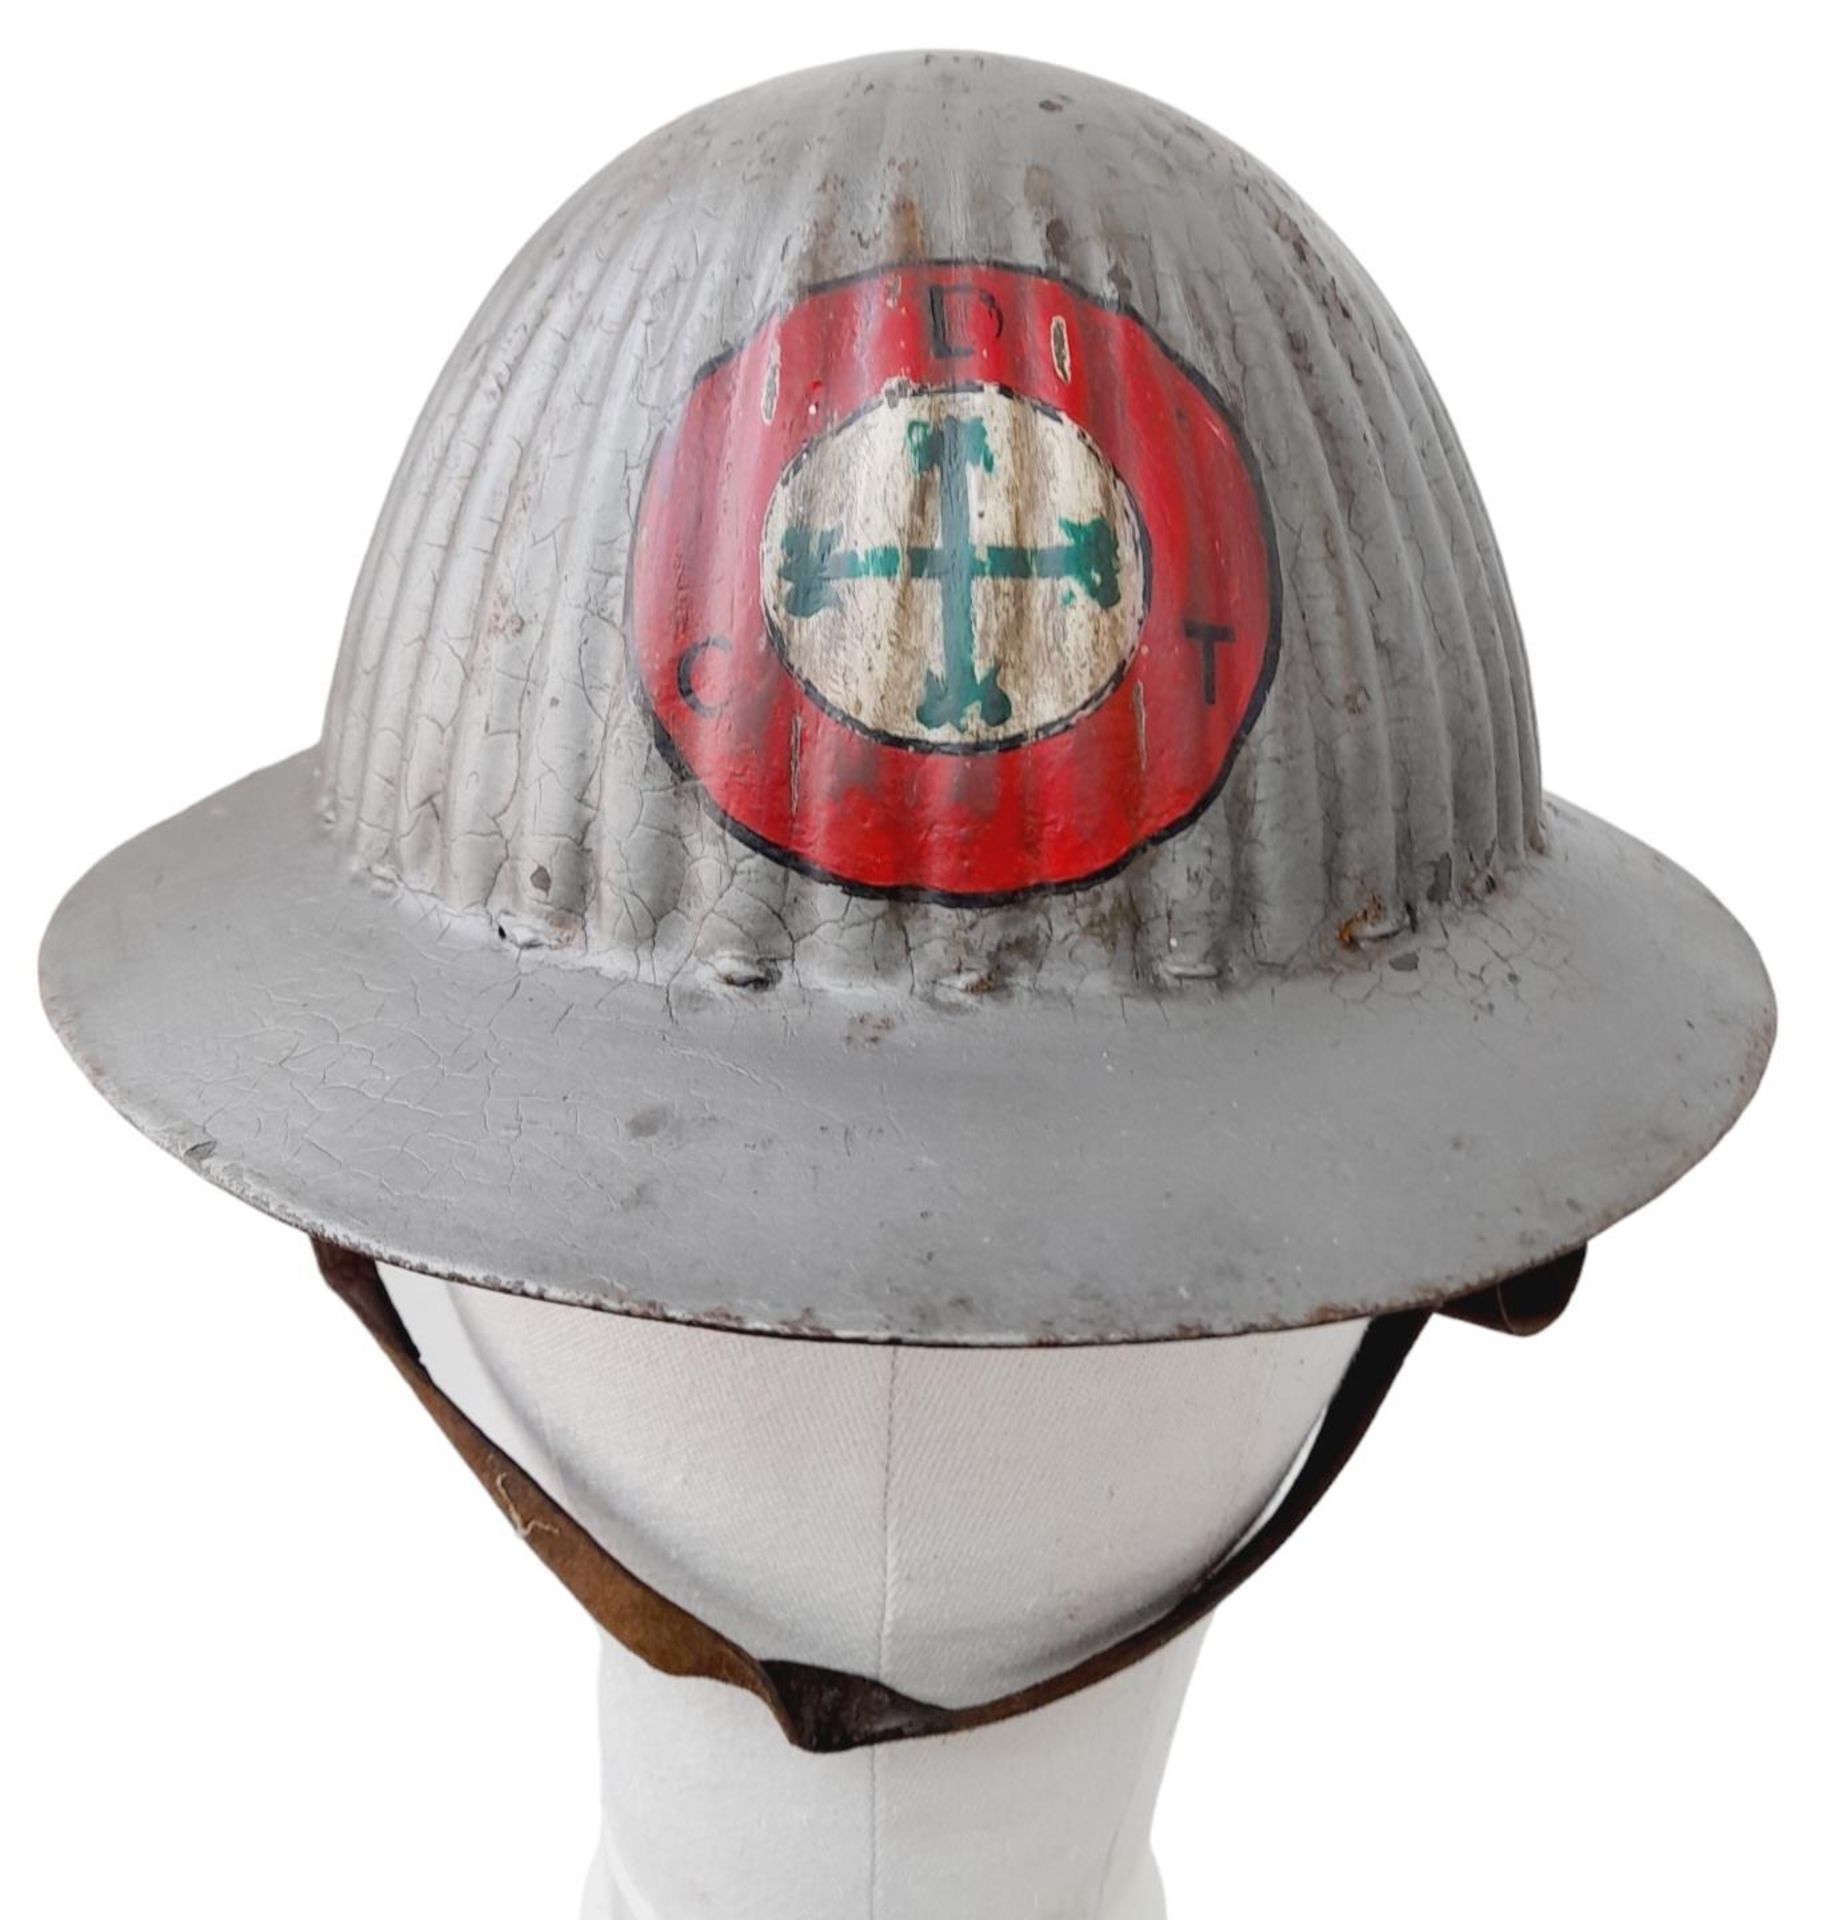 WW1 Portuguese 1916 Helmet complete with original liner and chinstrap. The helmet was used again